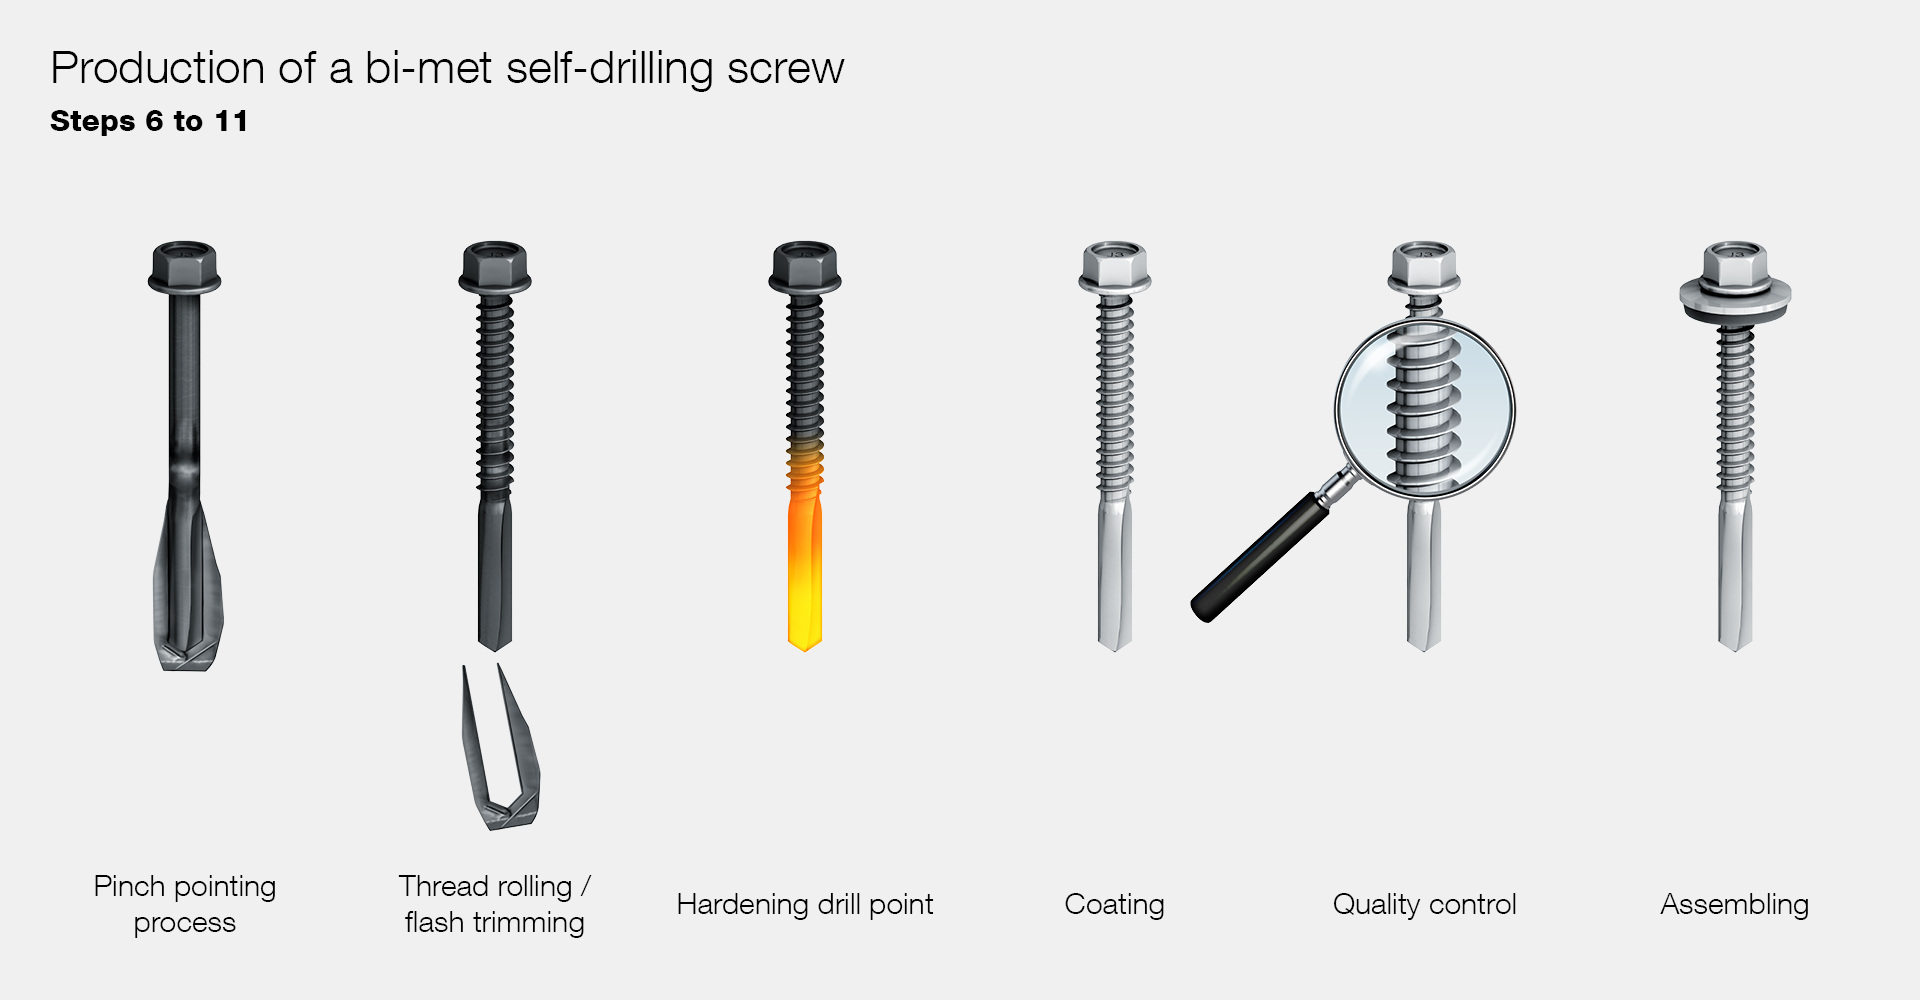 Production of a bi-met self-drilling screw (steps 6 to 11)